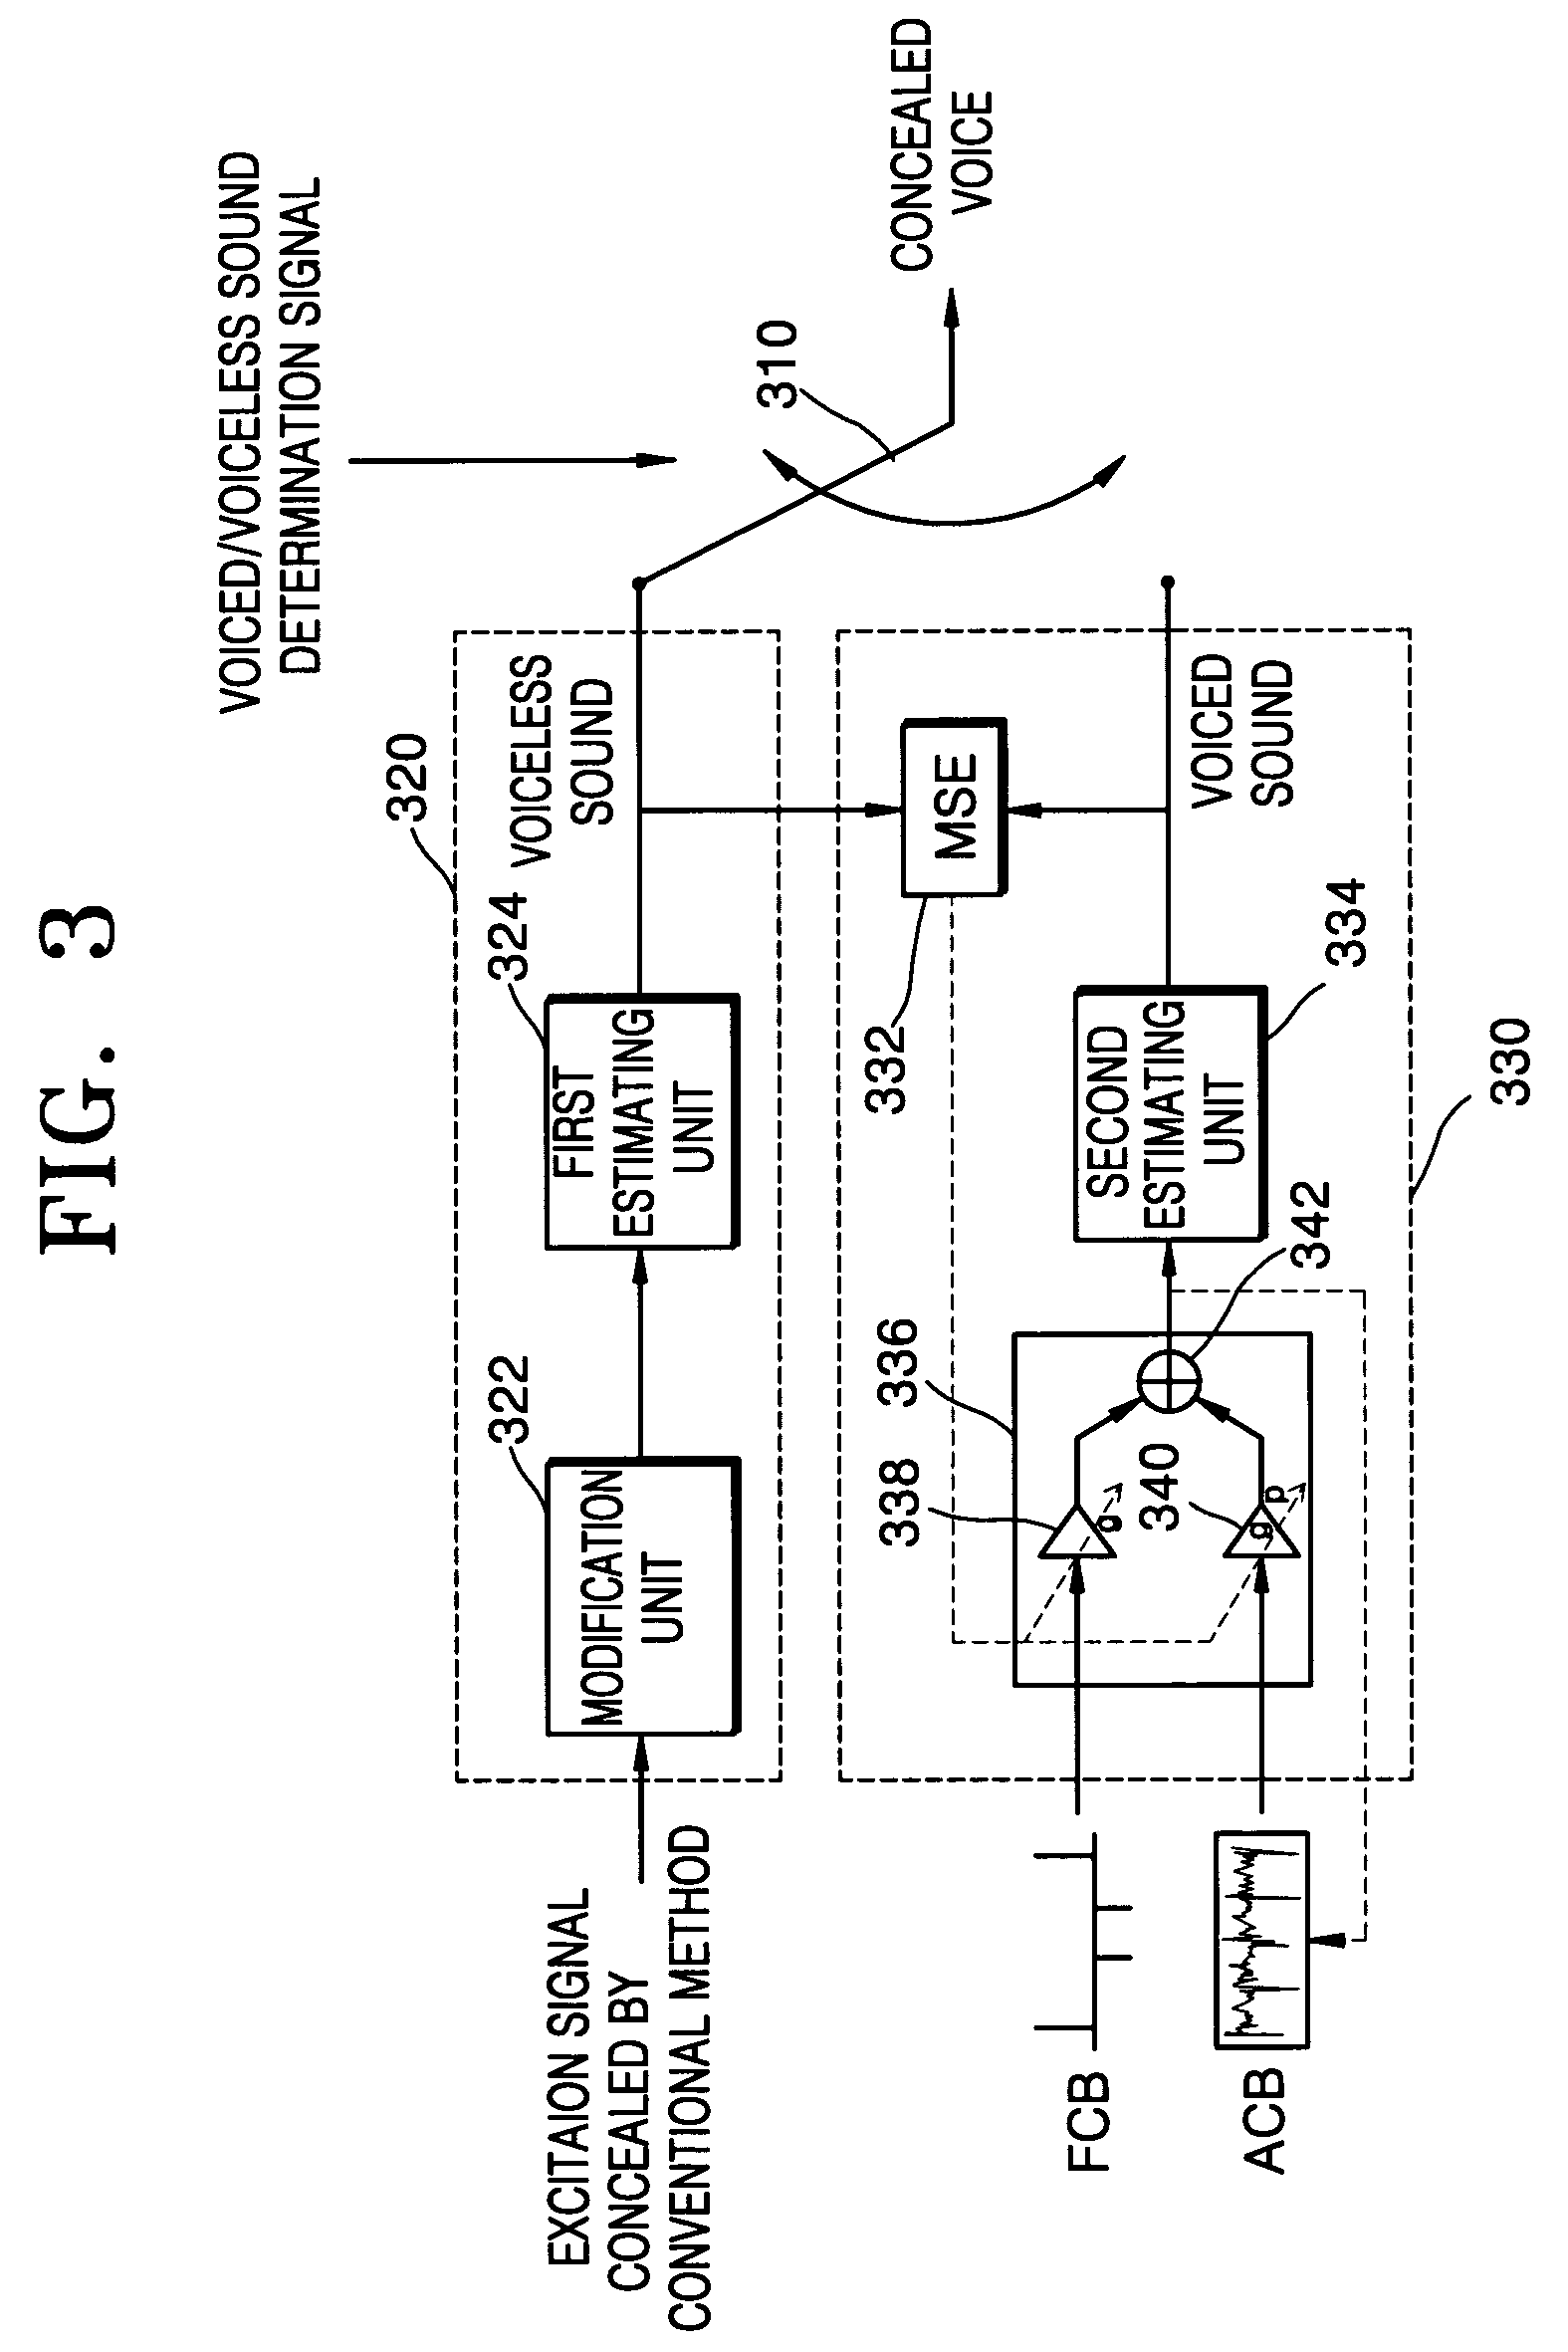 Speech restoration system and method for concealing packet losses